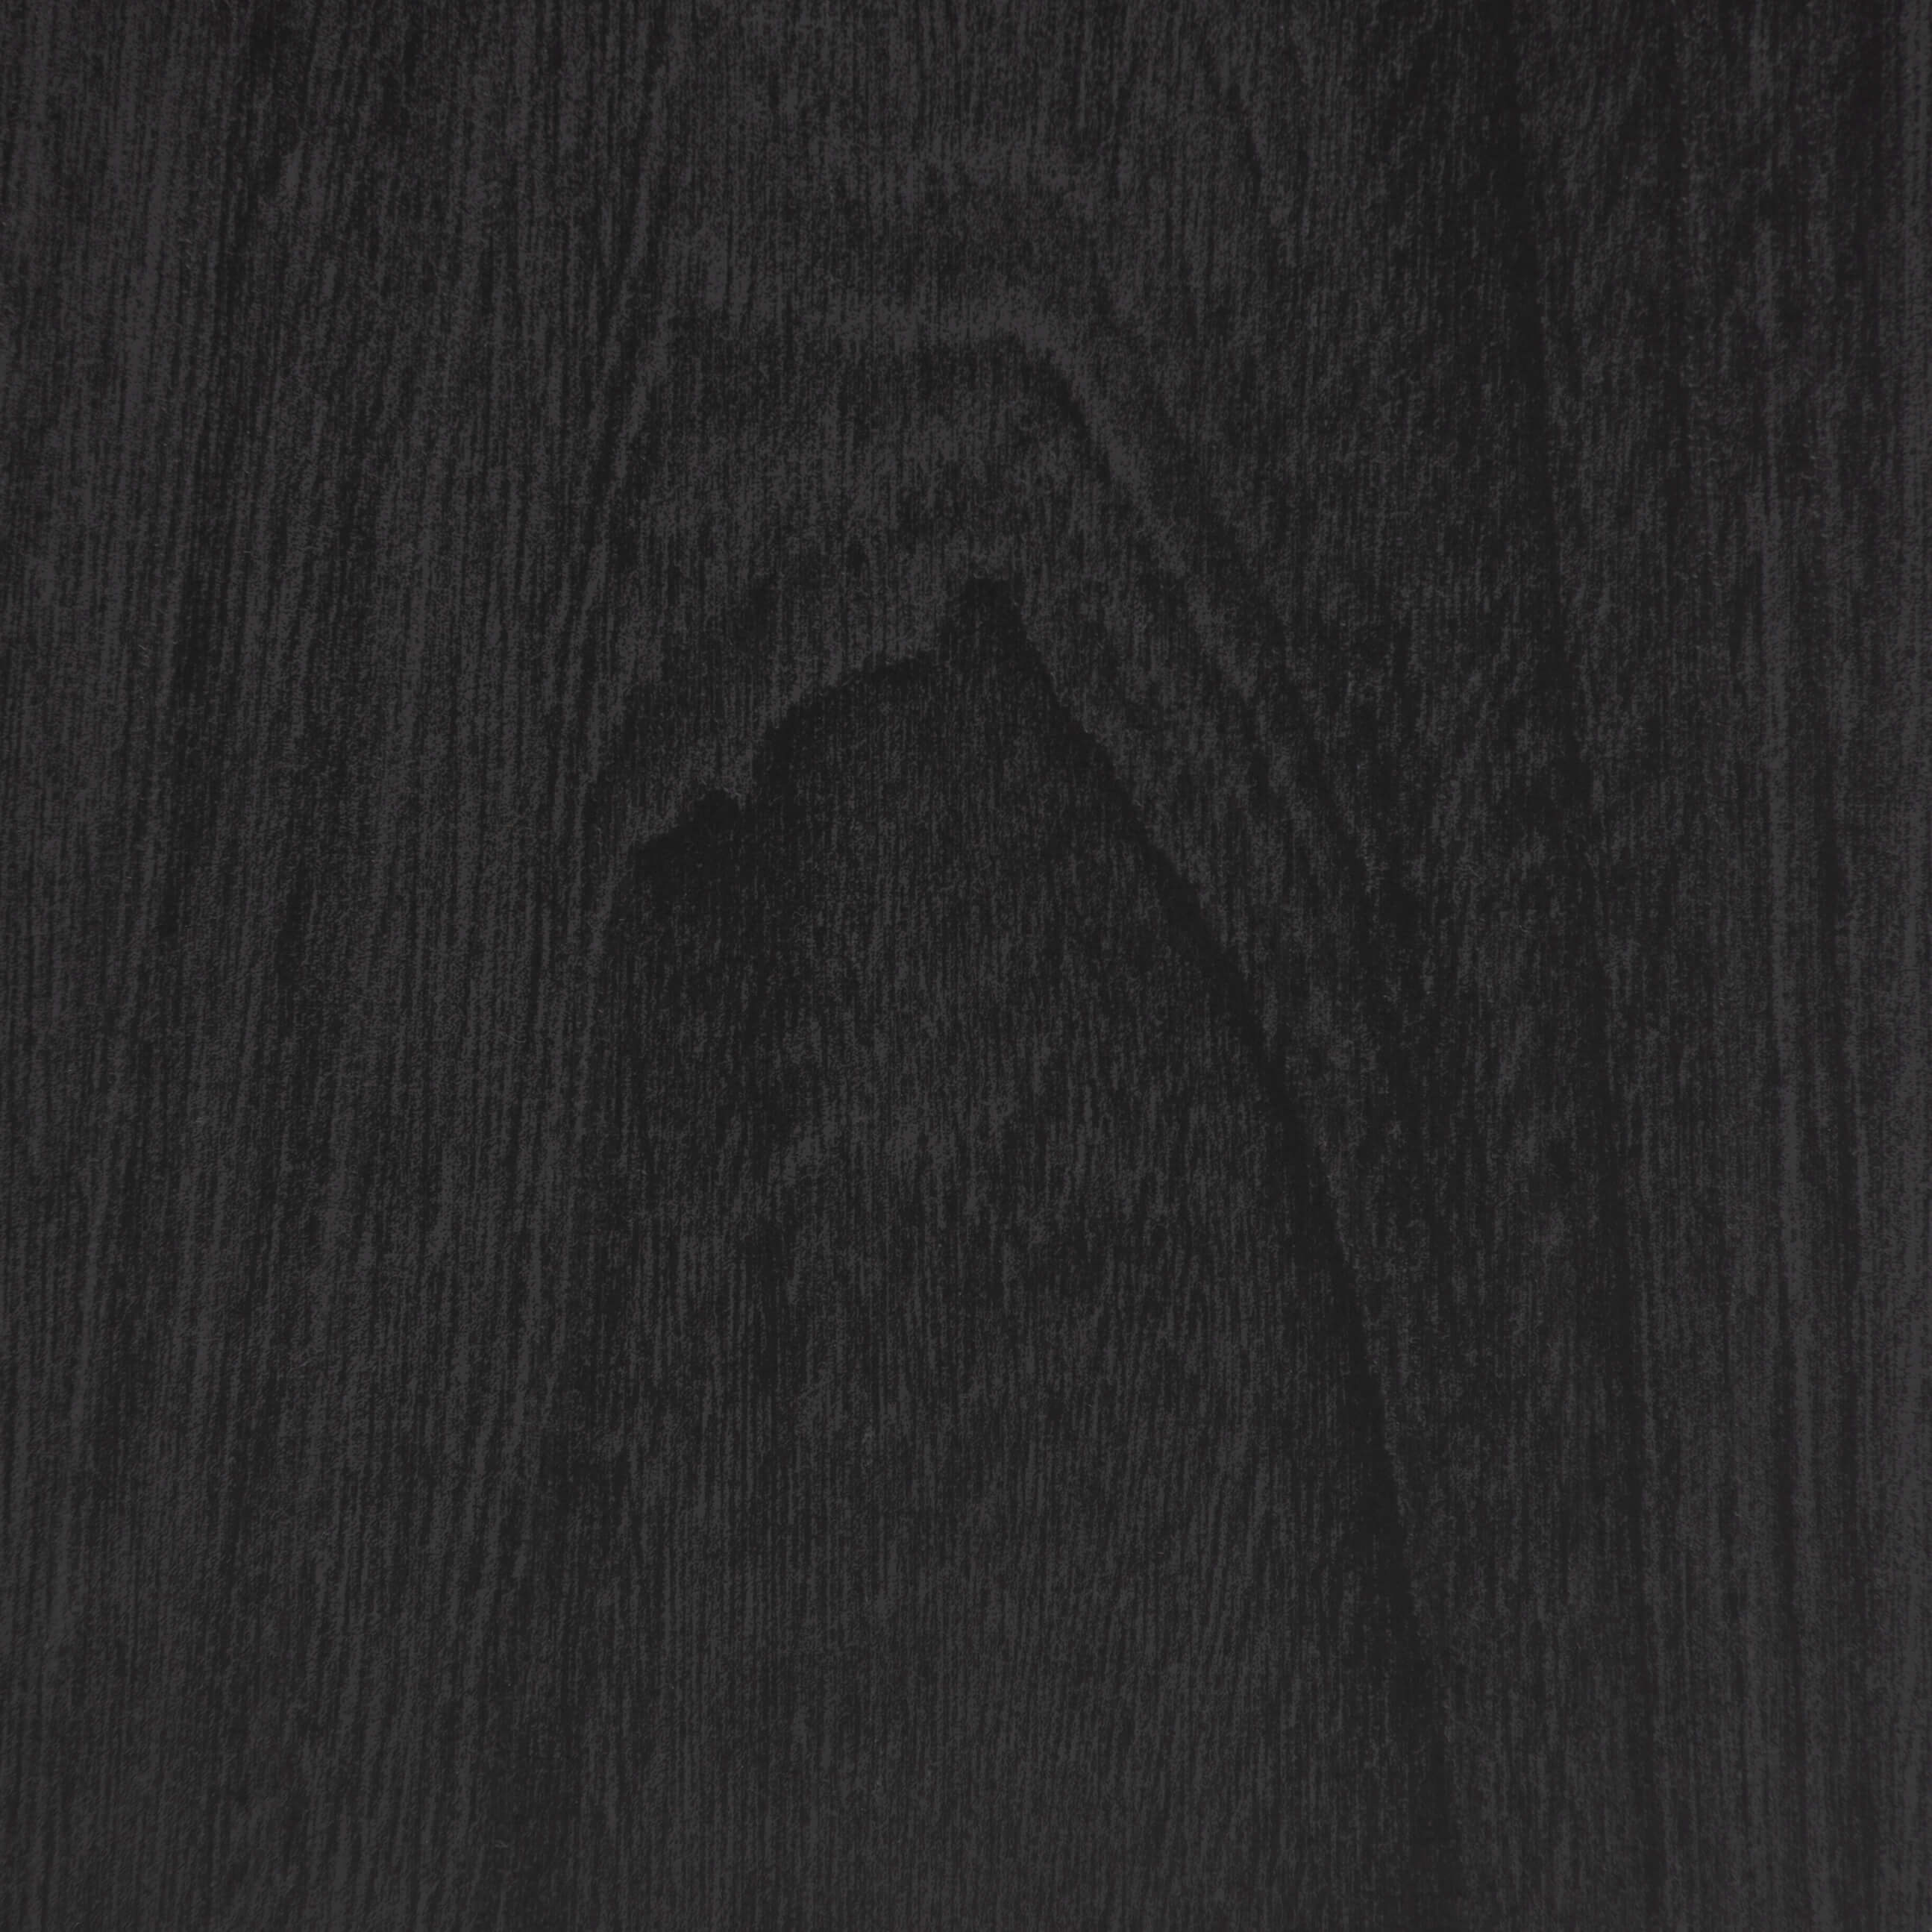 Mod Cabinetry Euro Line Textura Antracita Solid Wood Texture